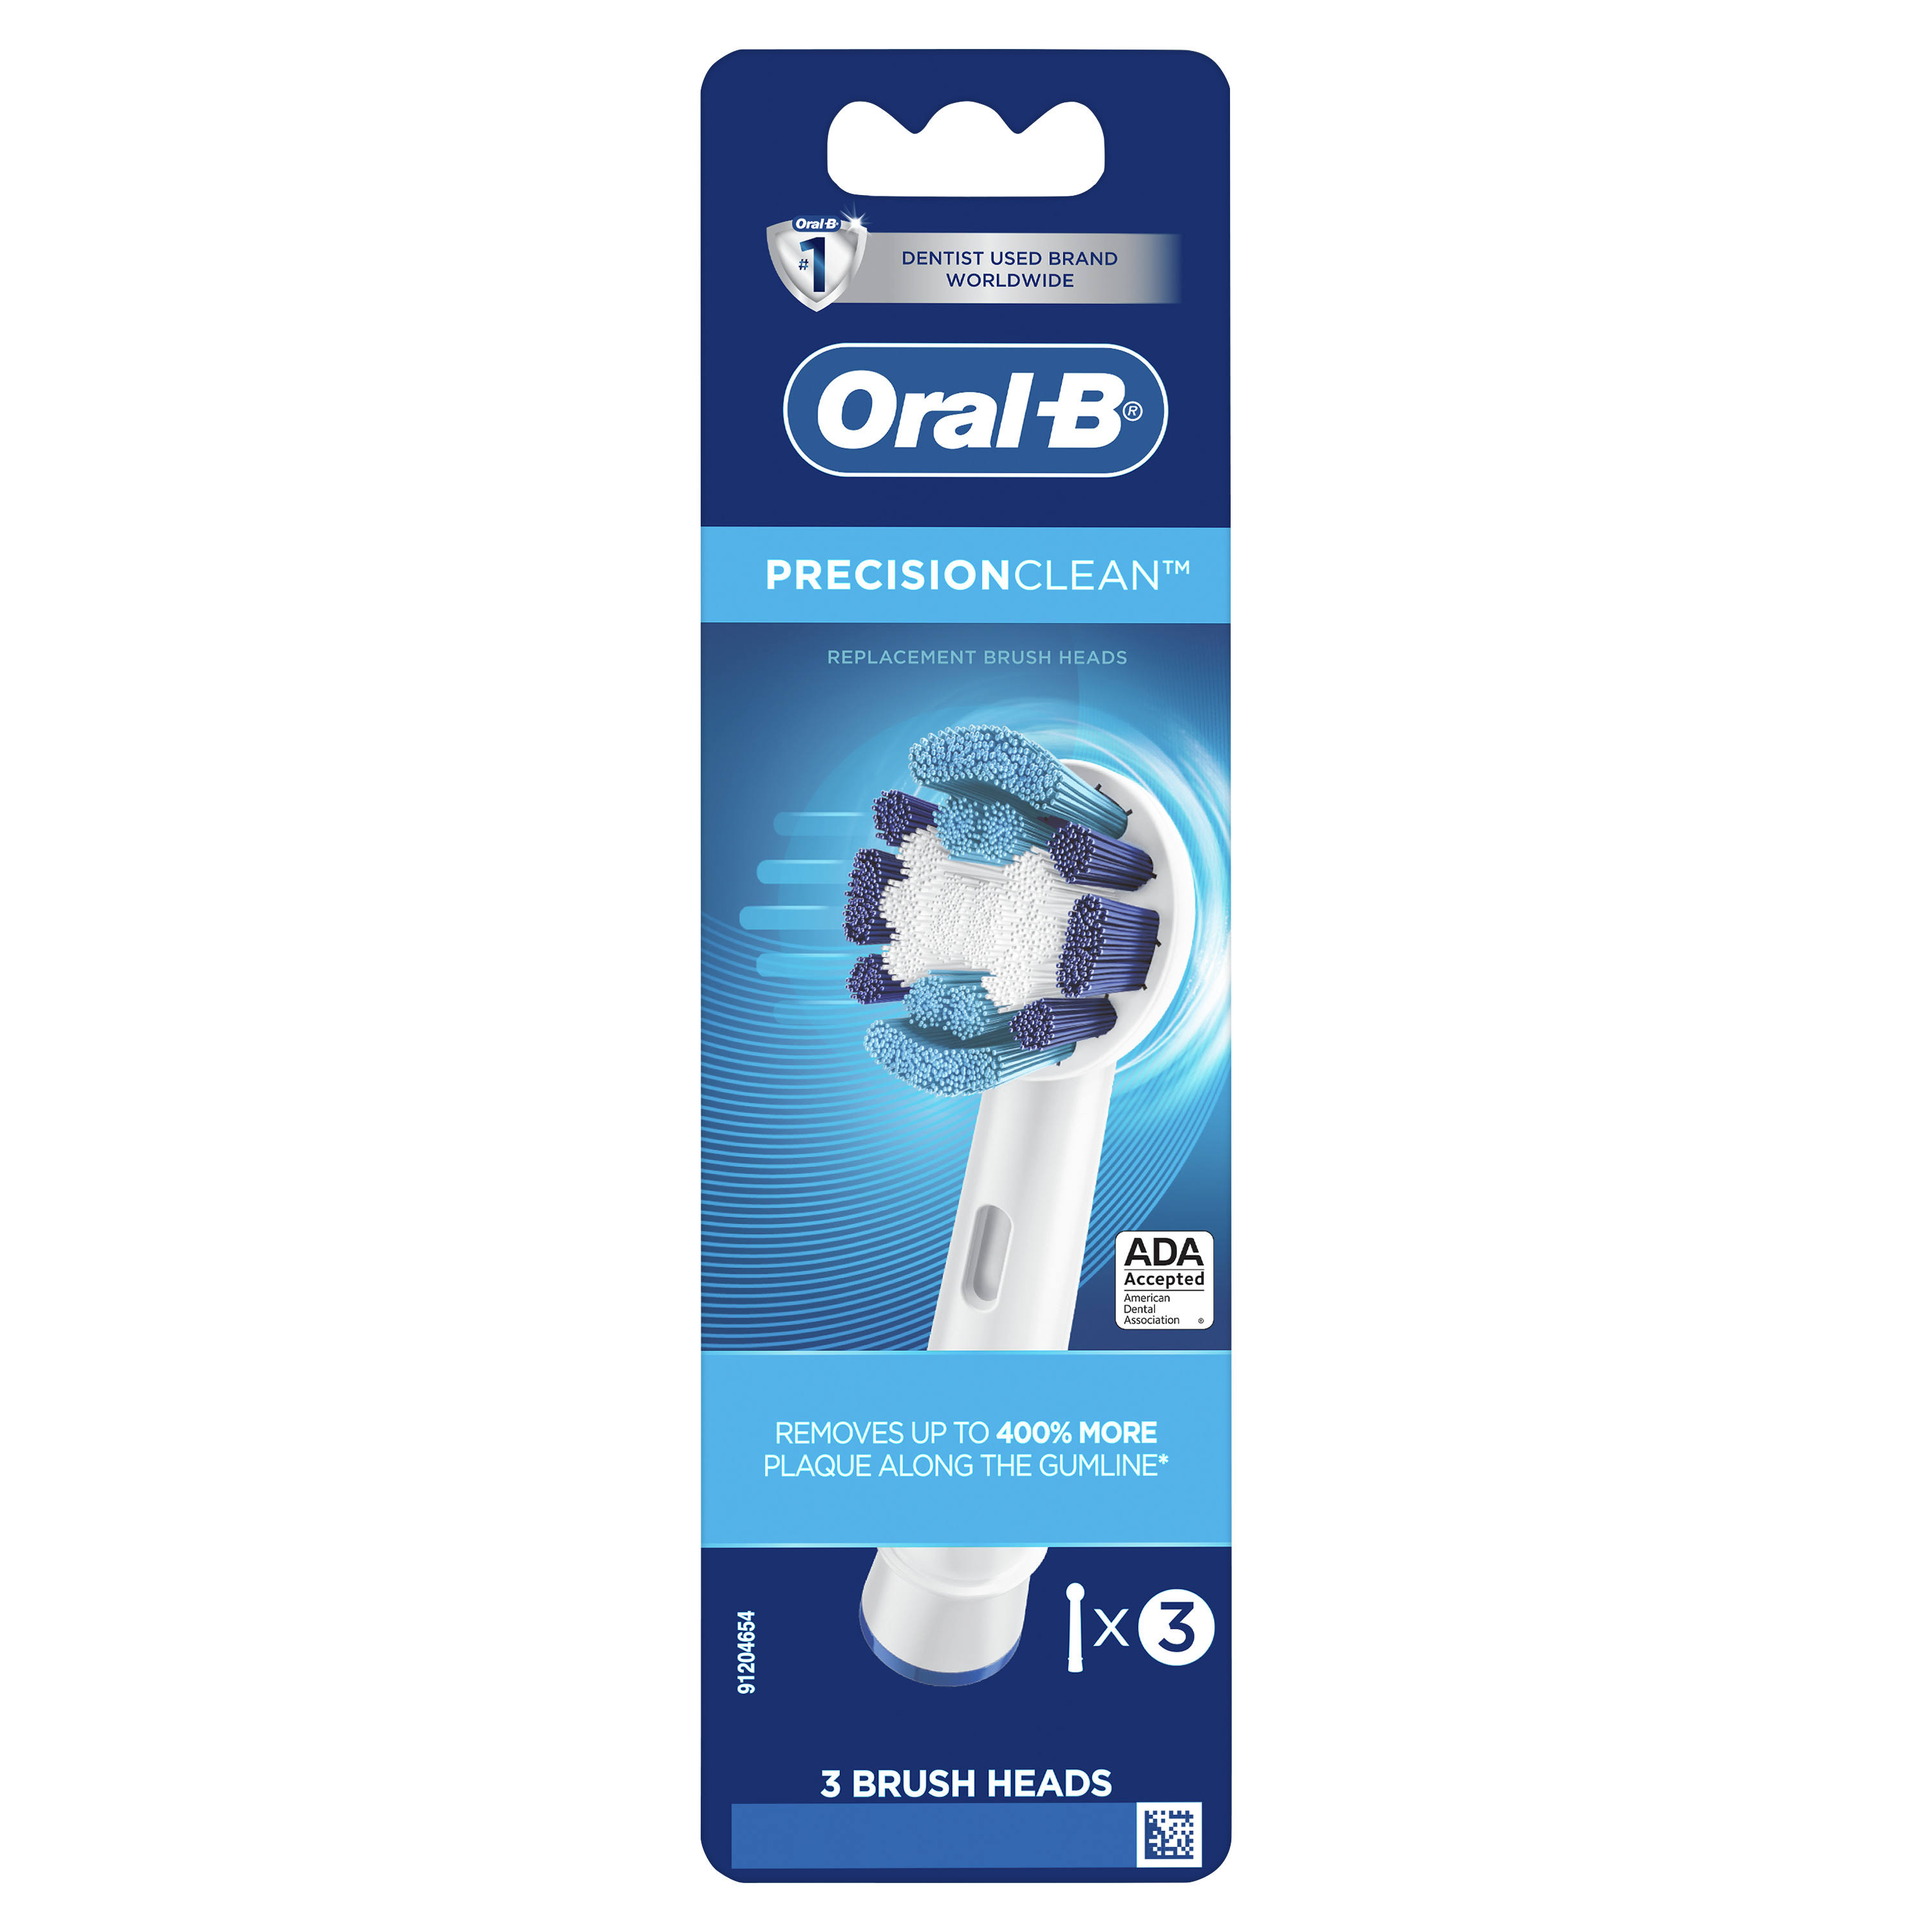 Oral-B Precision Clean Replacement Brush Heads - 3pk